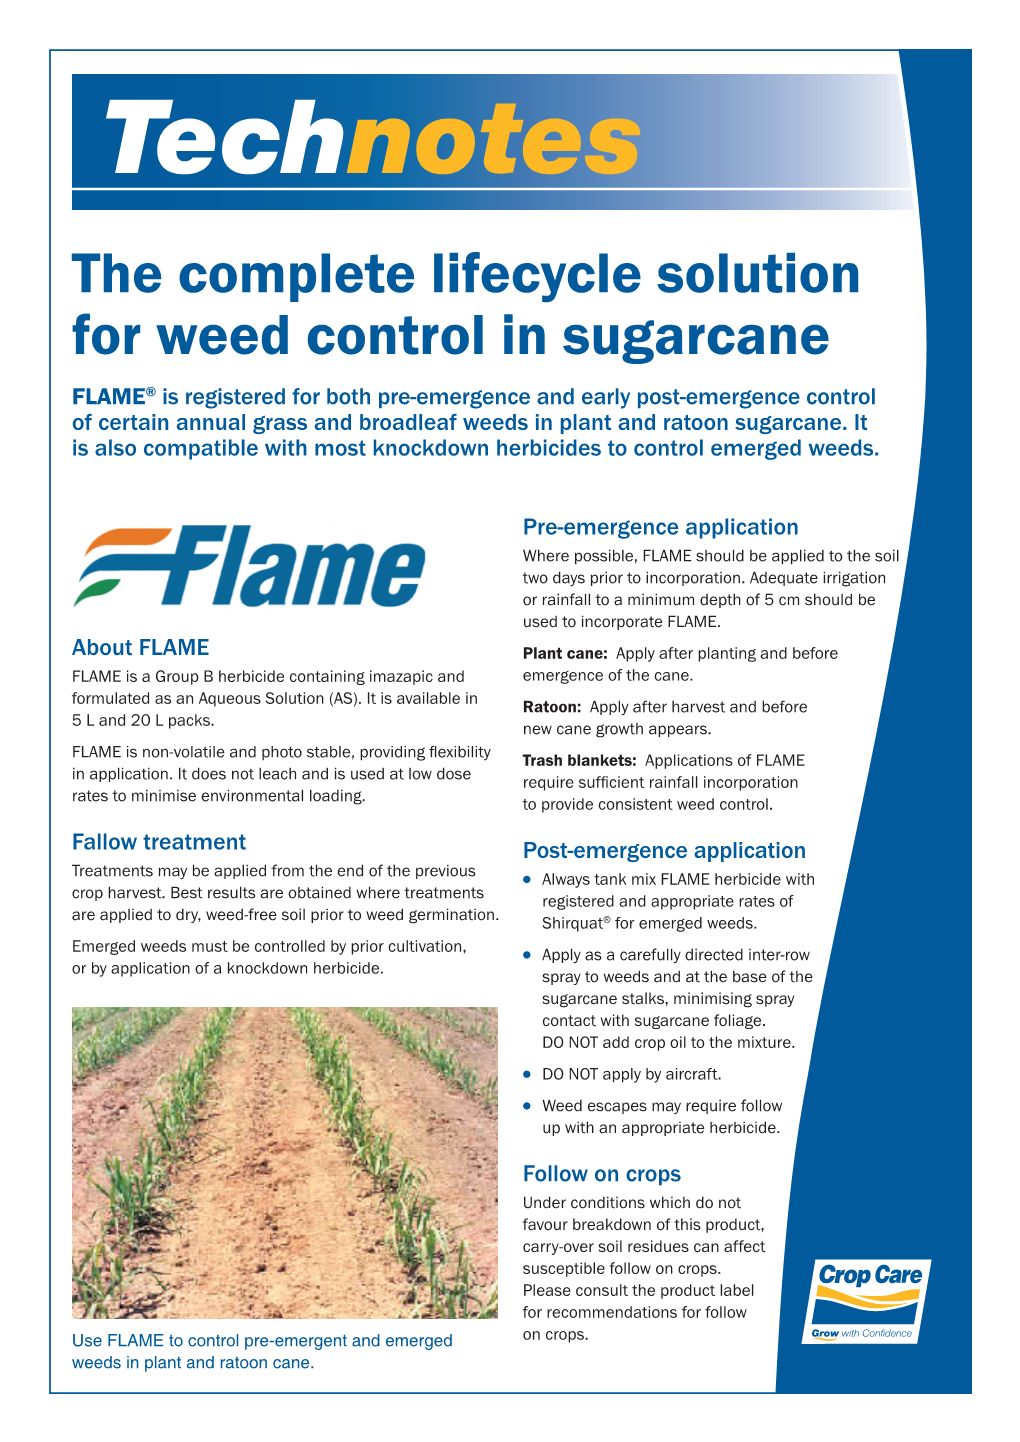 The Complete Lifecycle Solution for Weed Control in Sugarcane